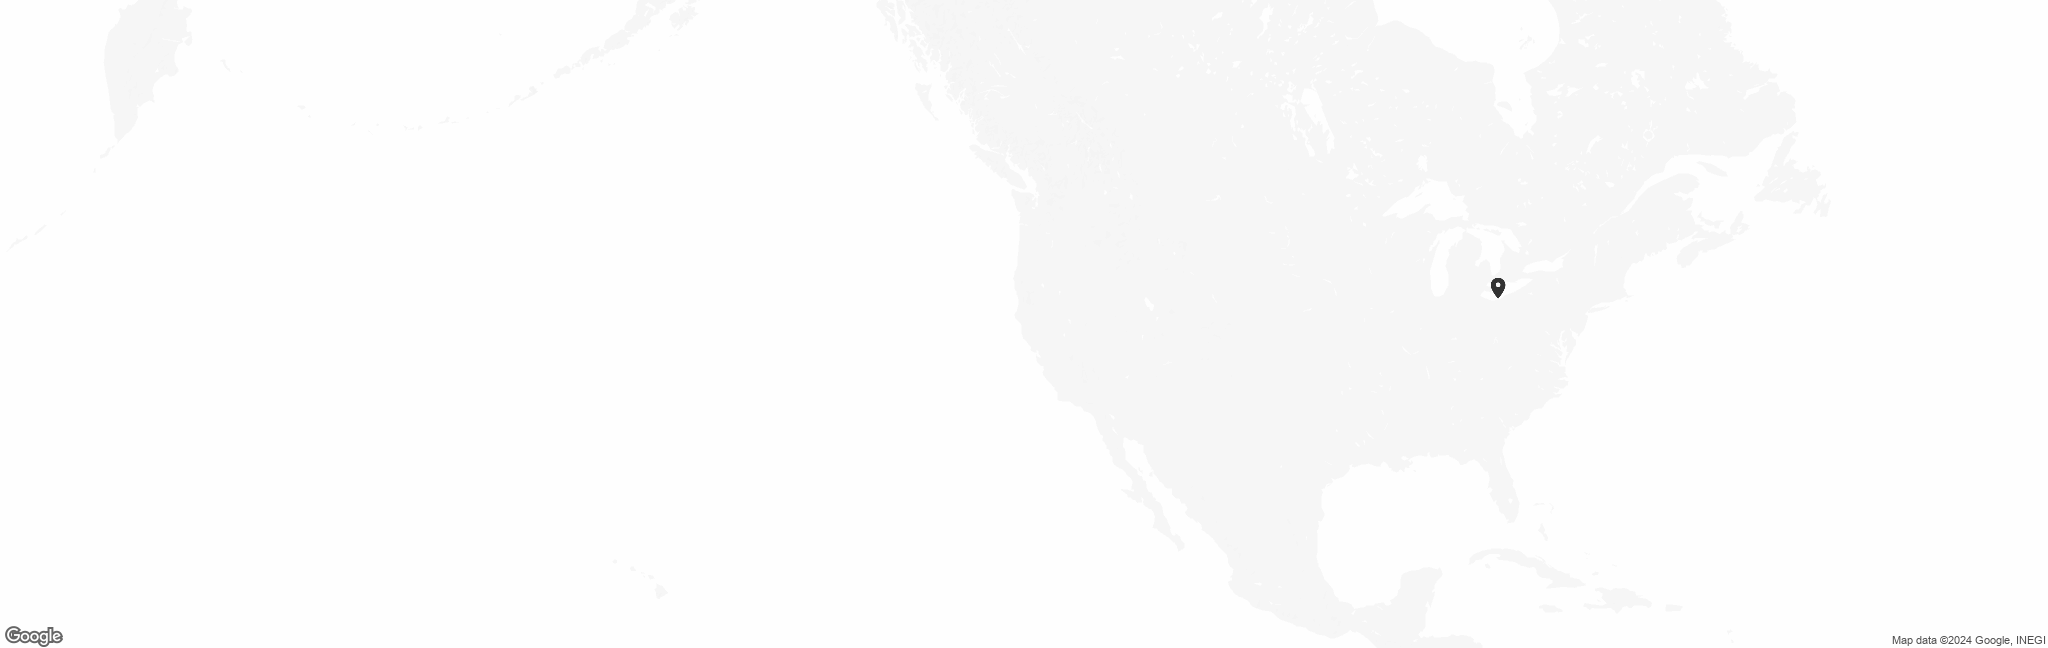 Map of US with pin of Human Phenome Diversity Foundation location